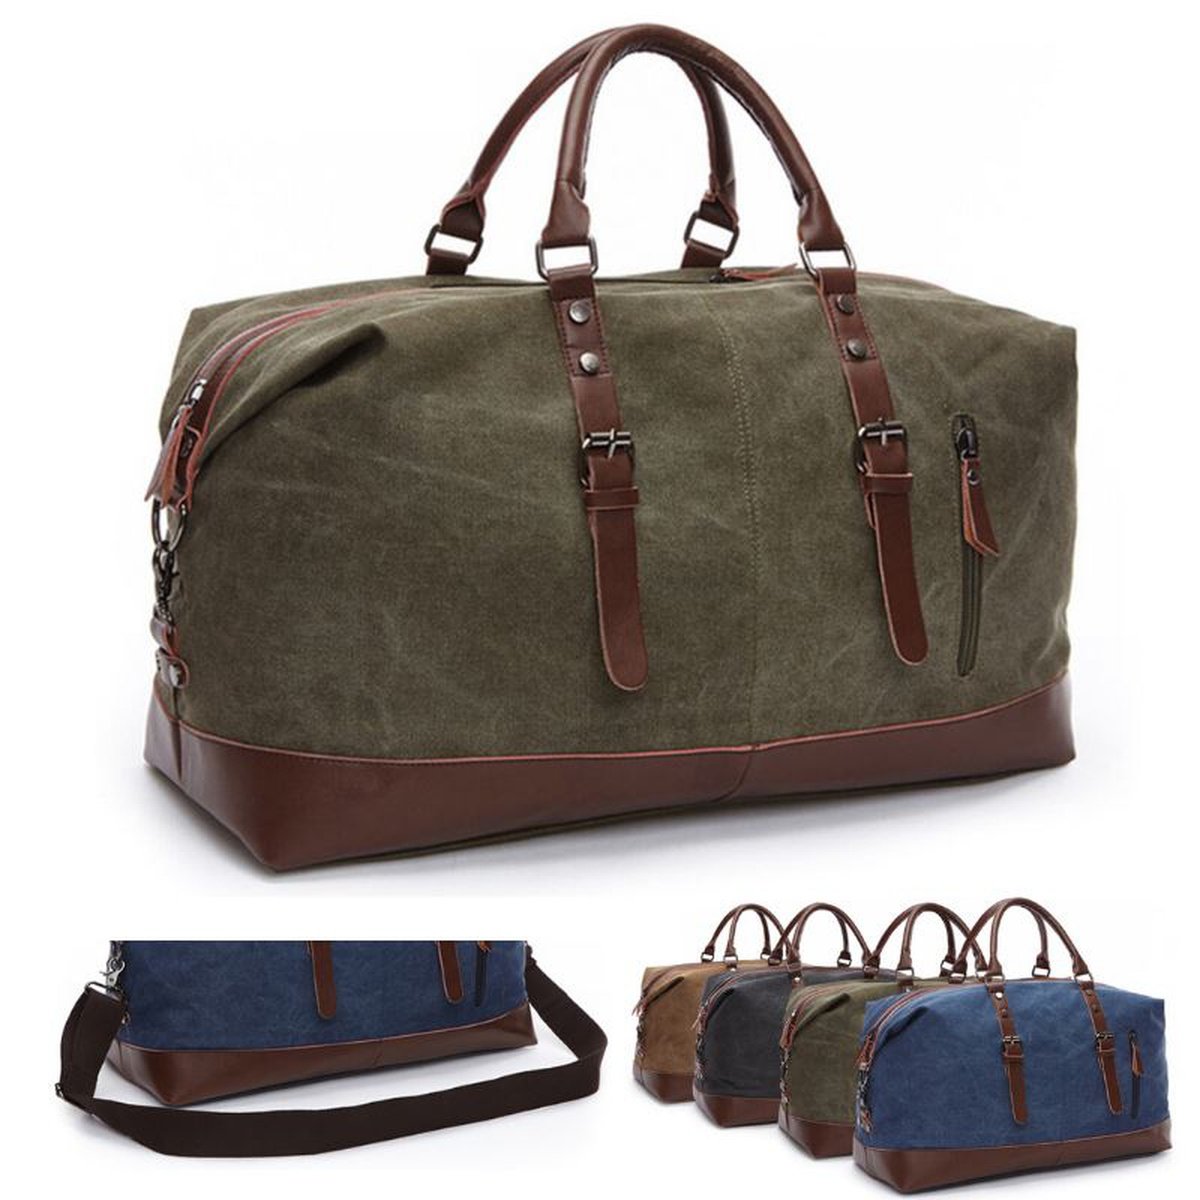 MRoyale™ Men's Canvas Leather Accent Duffle Weekend Travel Bag Duffle Travel Bag MRoyale™ Fashion Green 